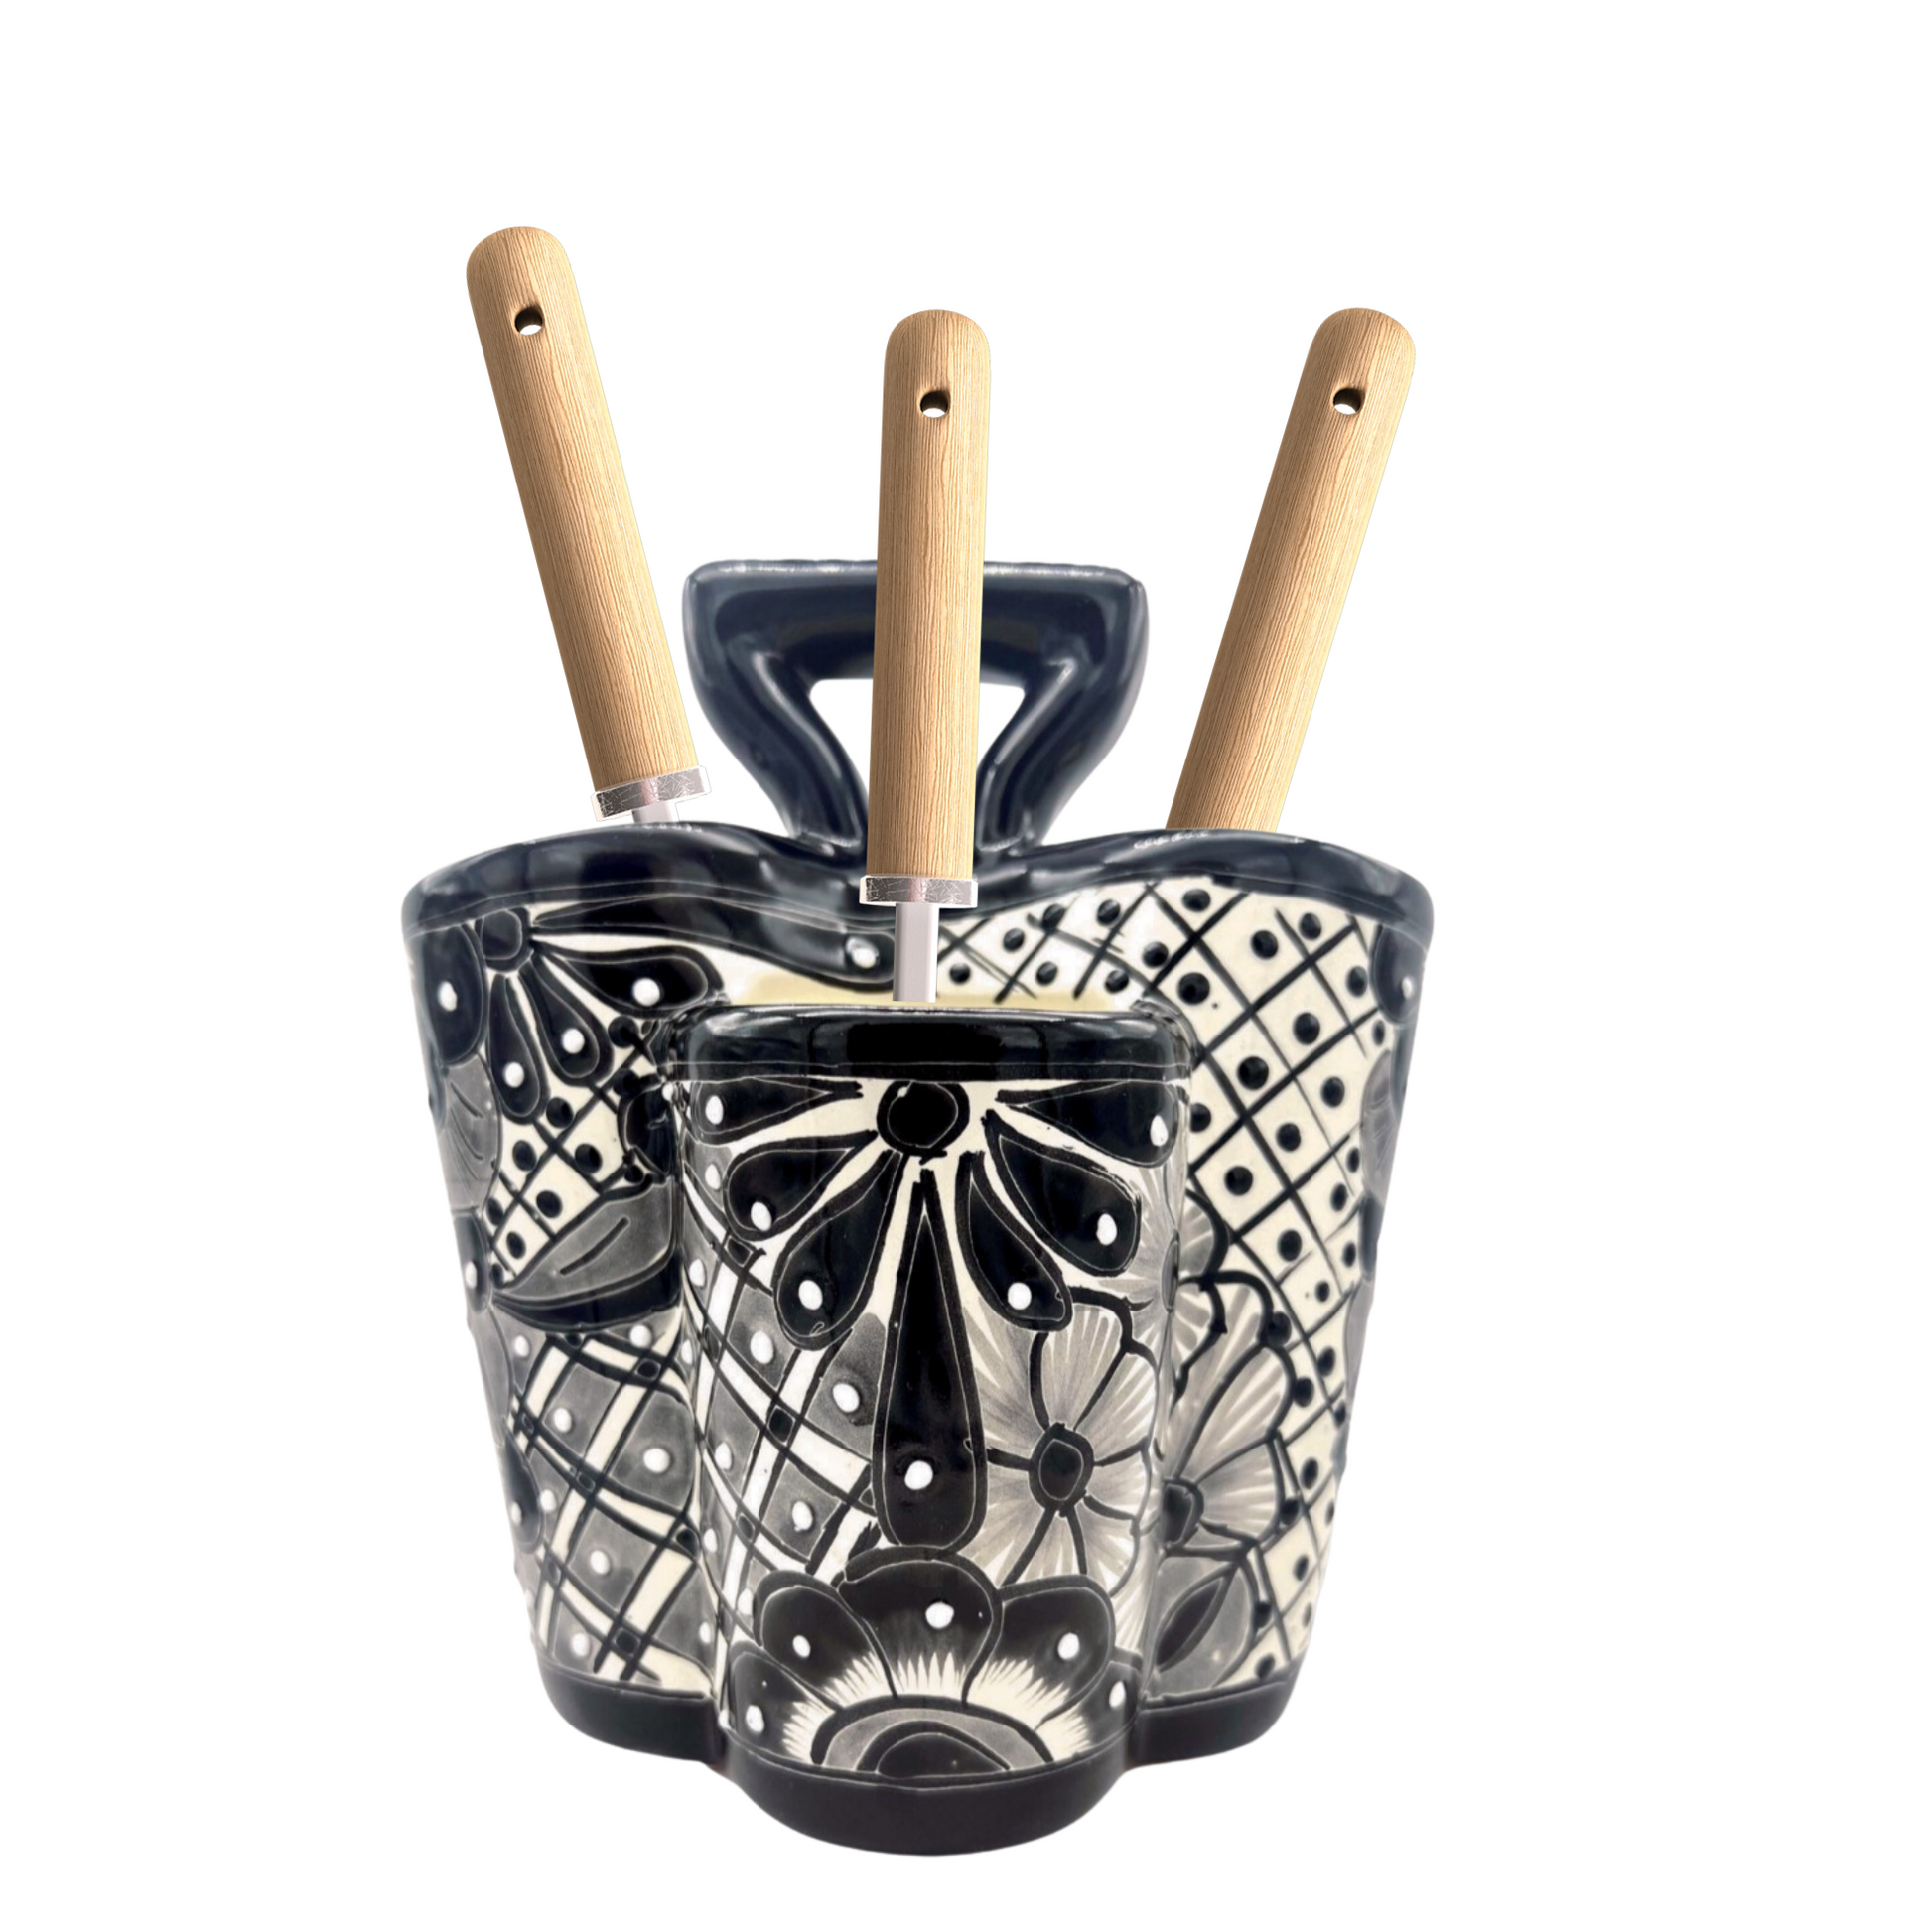 Large black and white ceramic utensil holder, hand-painted, handmade Mexican pottery, perfect as a kitchen organizer.